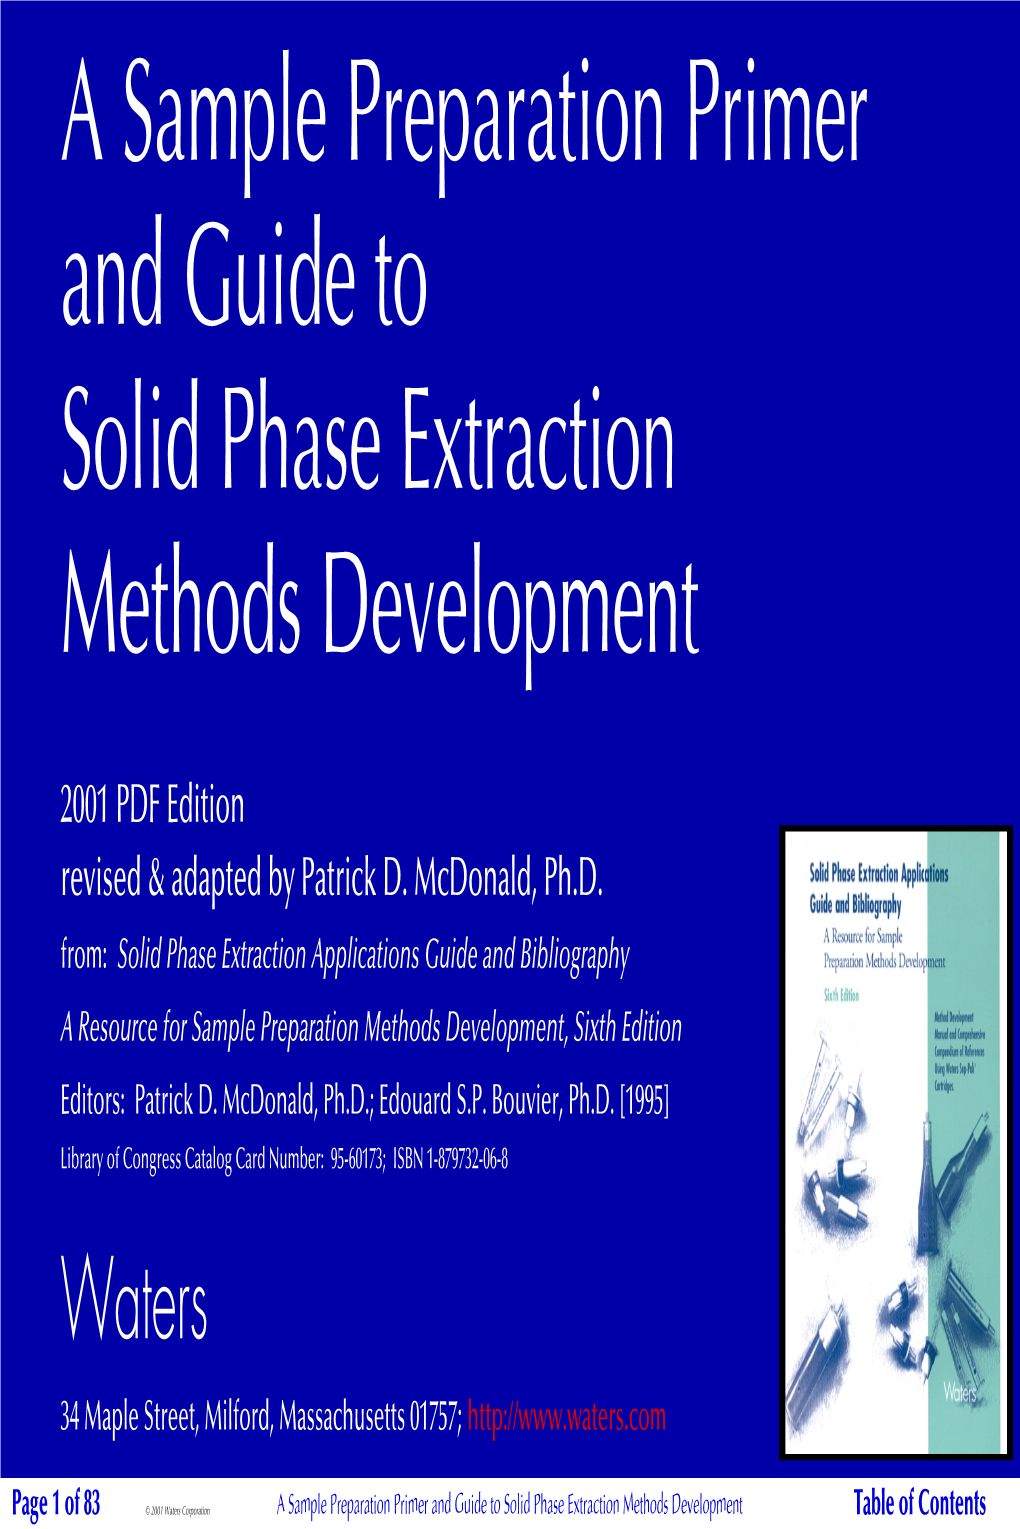 A Sample Preparation Primer and Guide to Solid Phase Extraction Methods Development